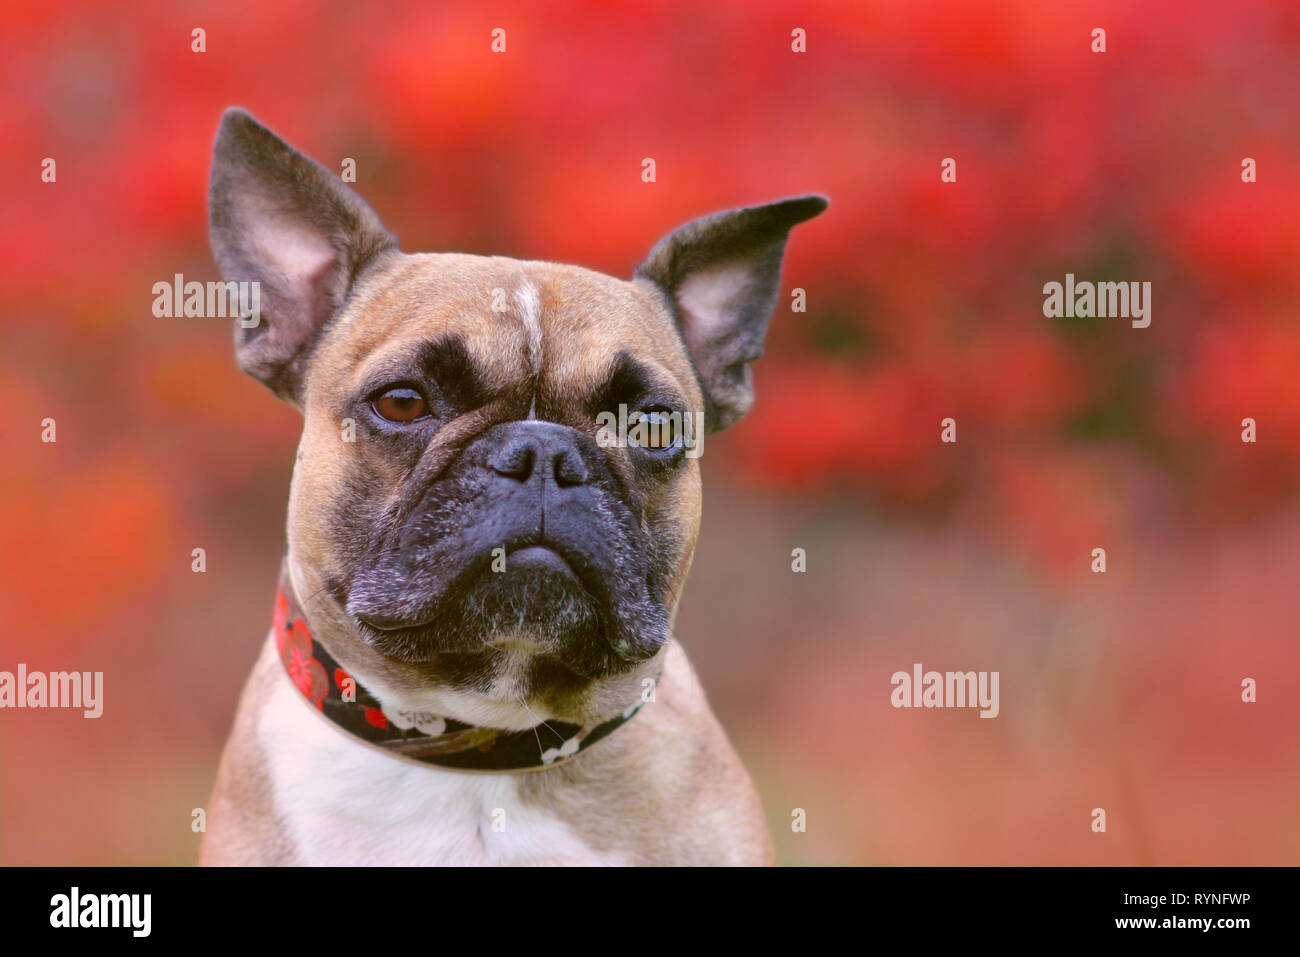 Portrait shot of head of a fawn French Bulldog dog with black mask and pointy ears in front of blurry red autumn background Stock Photo